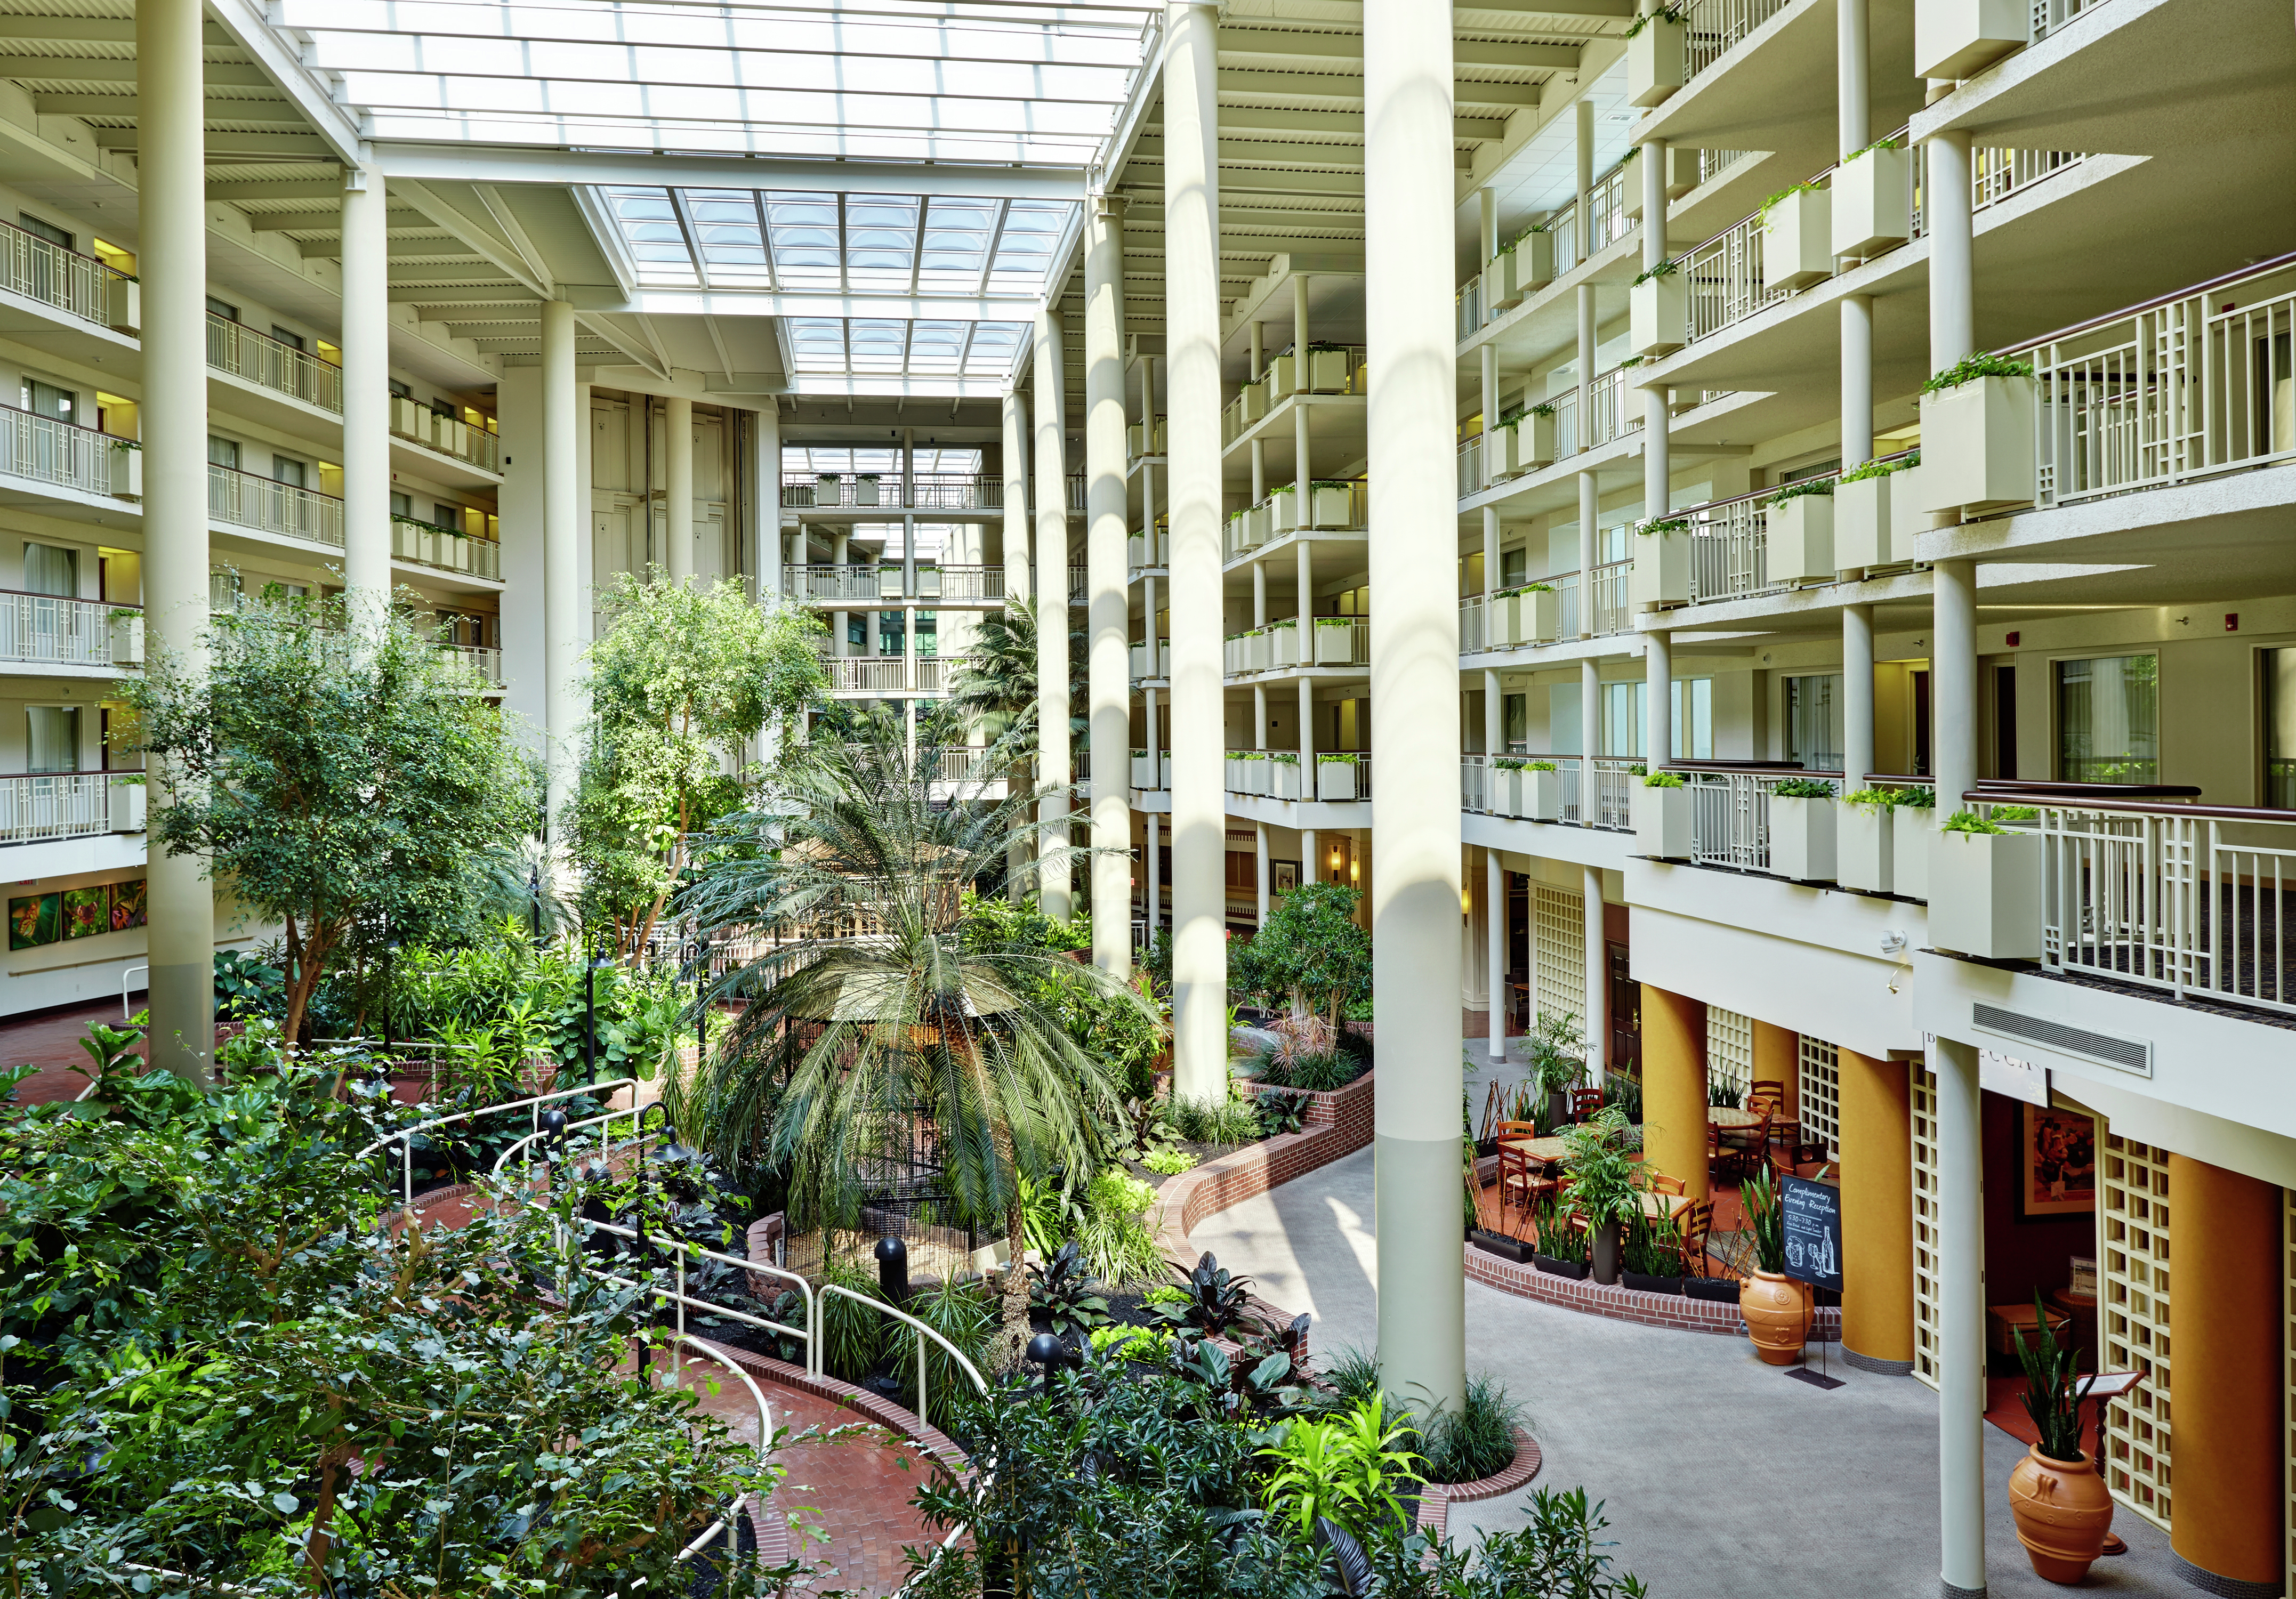 Hotel Atrium with Overlooking Balconies and Foliage